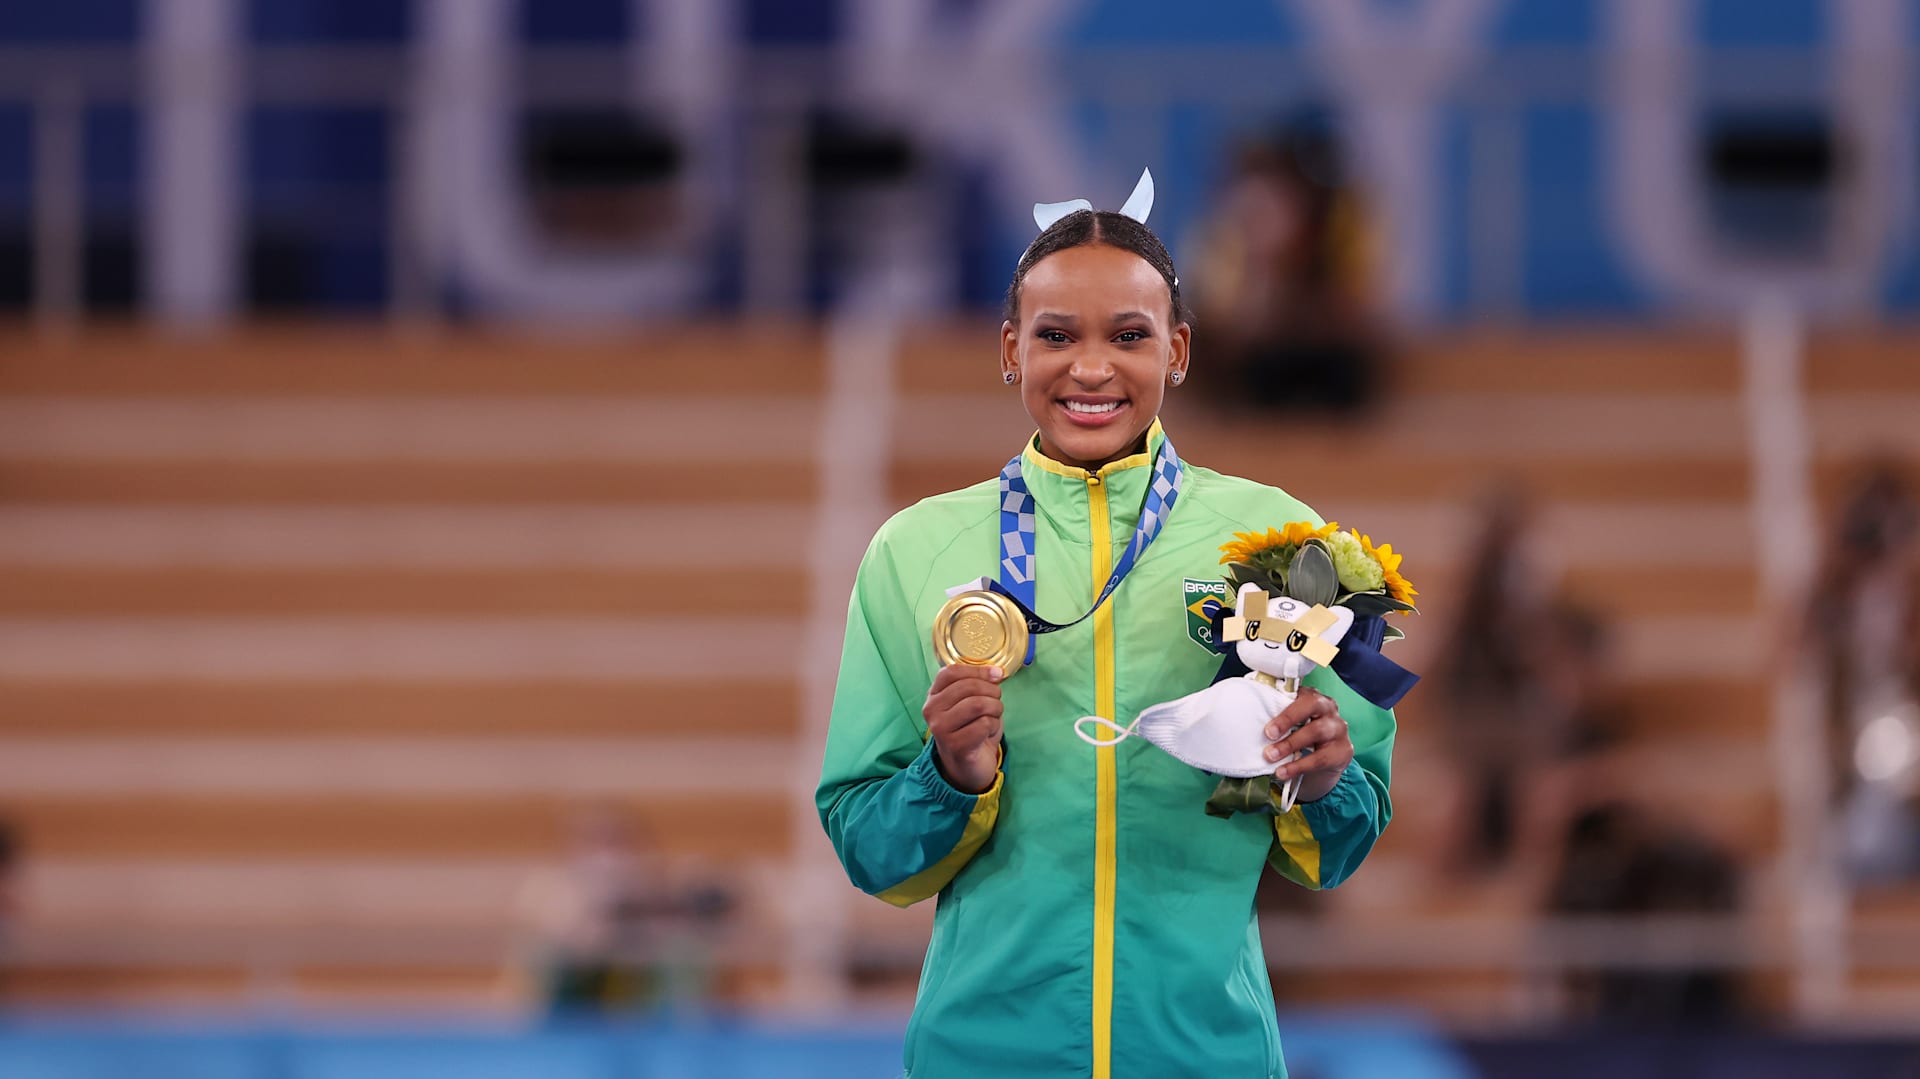 Brazil women's gymnastics team wins first world champs medal with matriarch  on hand - NBC Sports